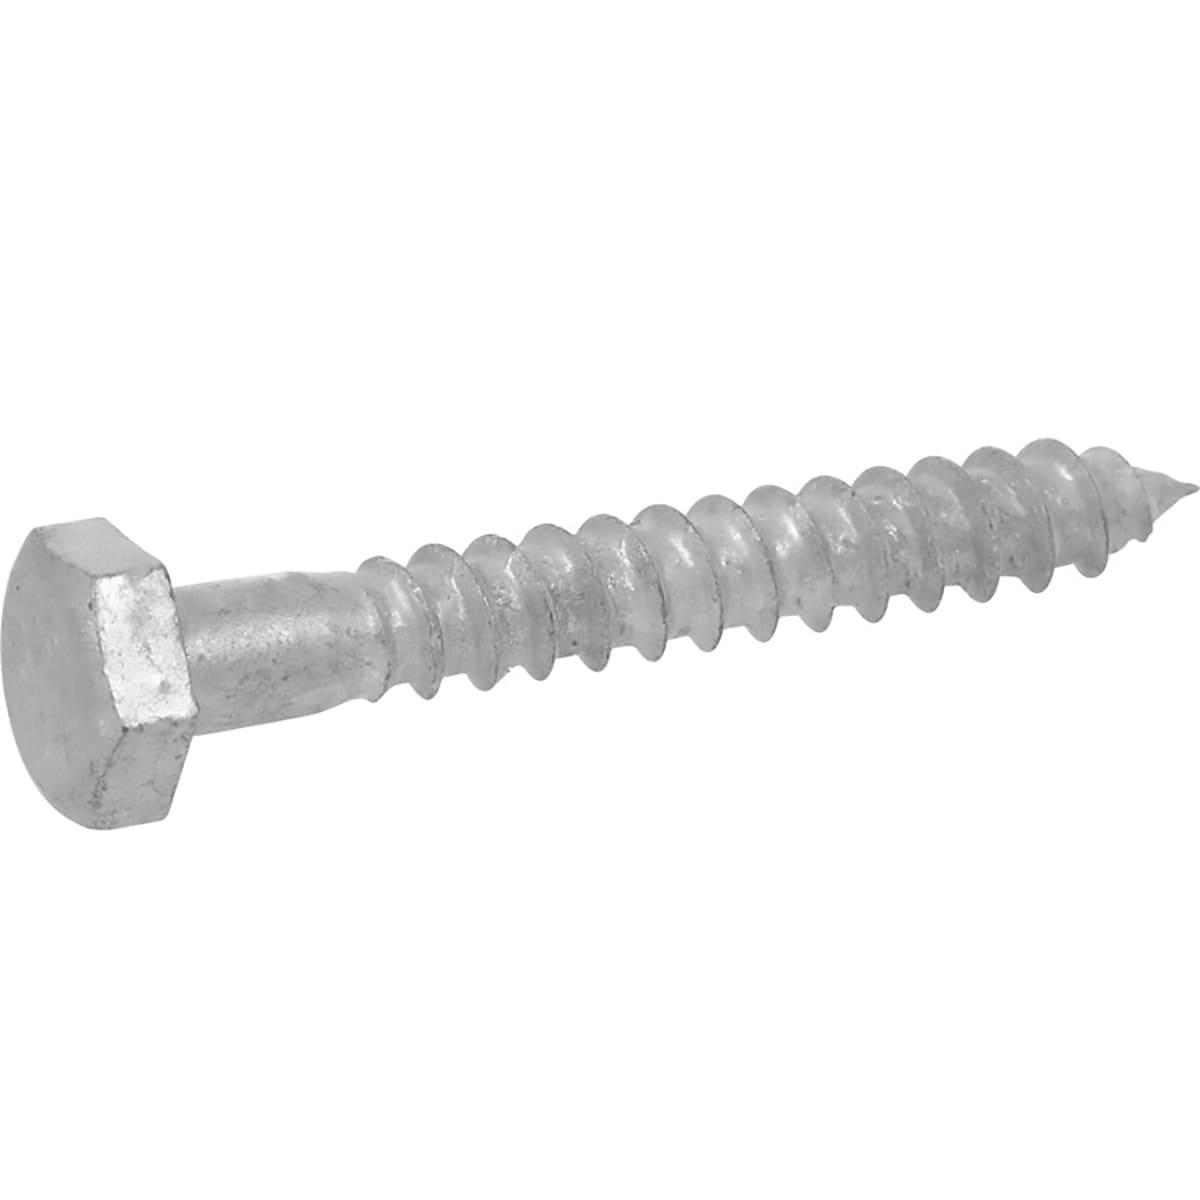 Lag Bolt Screw Hot Dipped Galvanized A307 Alloy Steel 3/8 x 2-1/2" Qty 250 